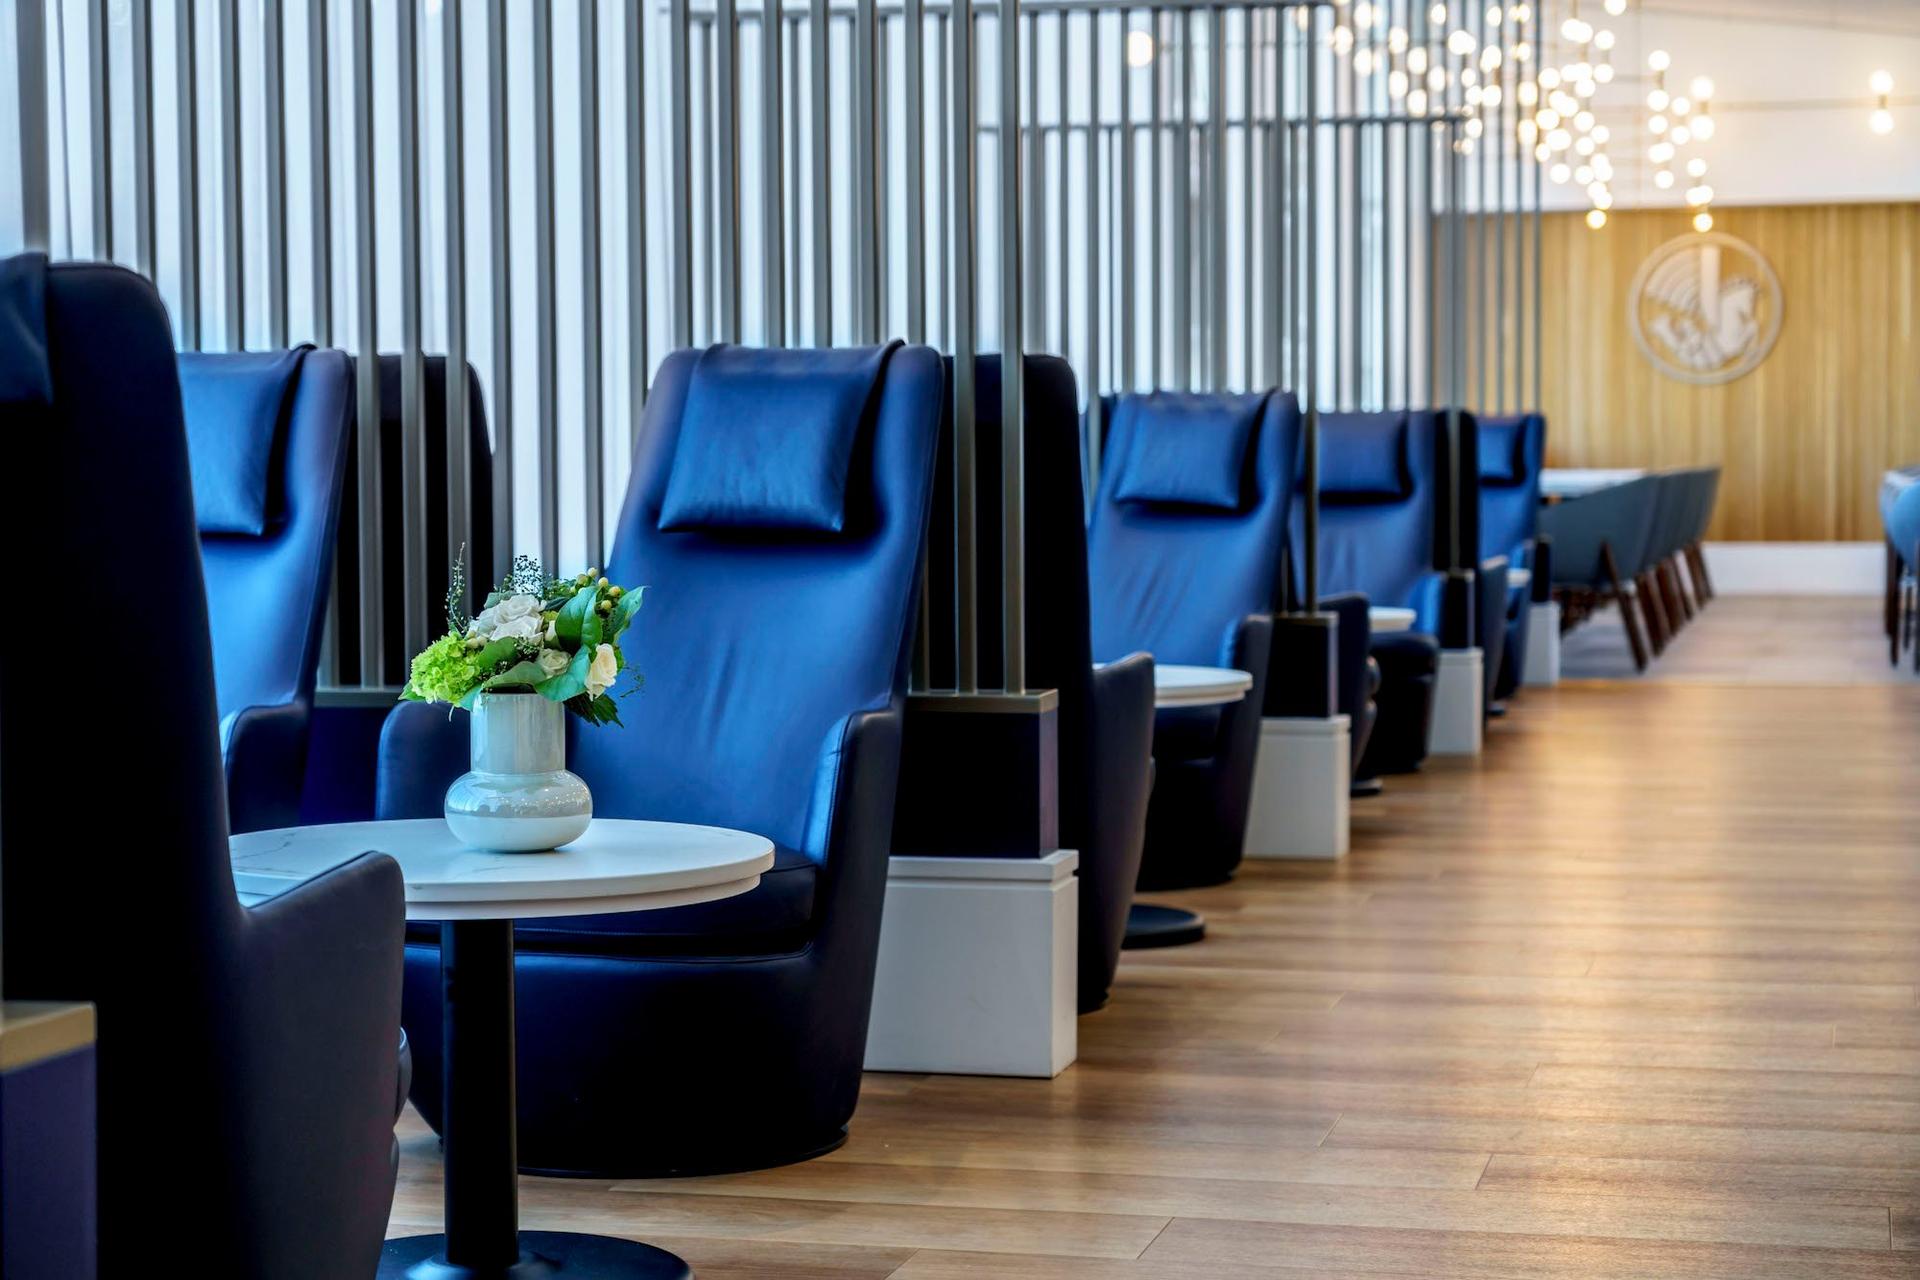 Air France/KLM Lounge operated by Plaza Premium Group image 5 of 10